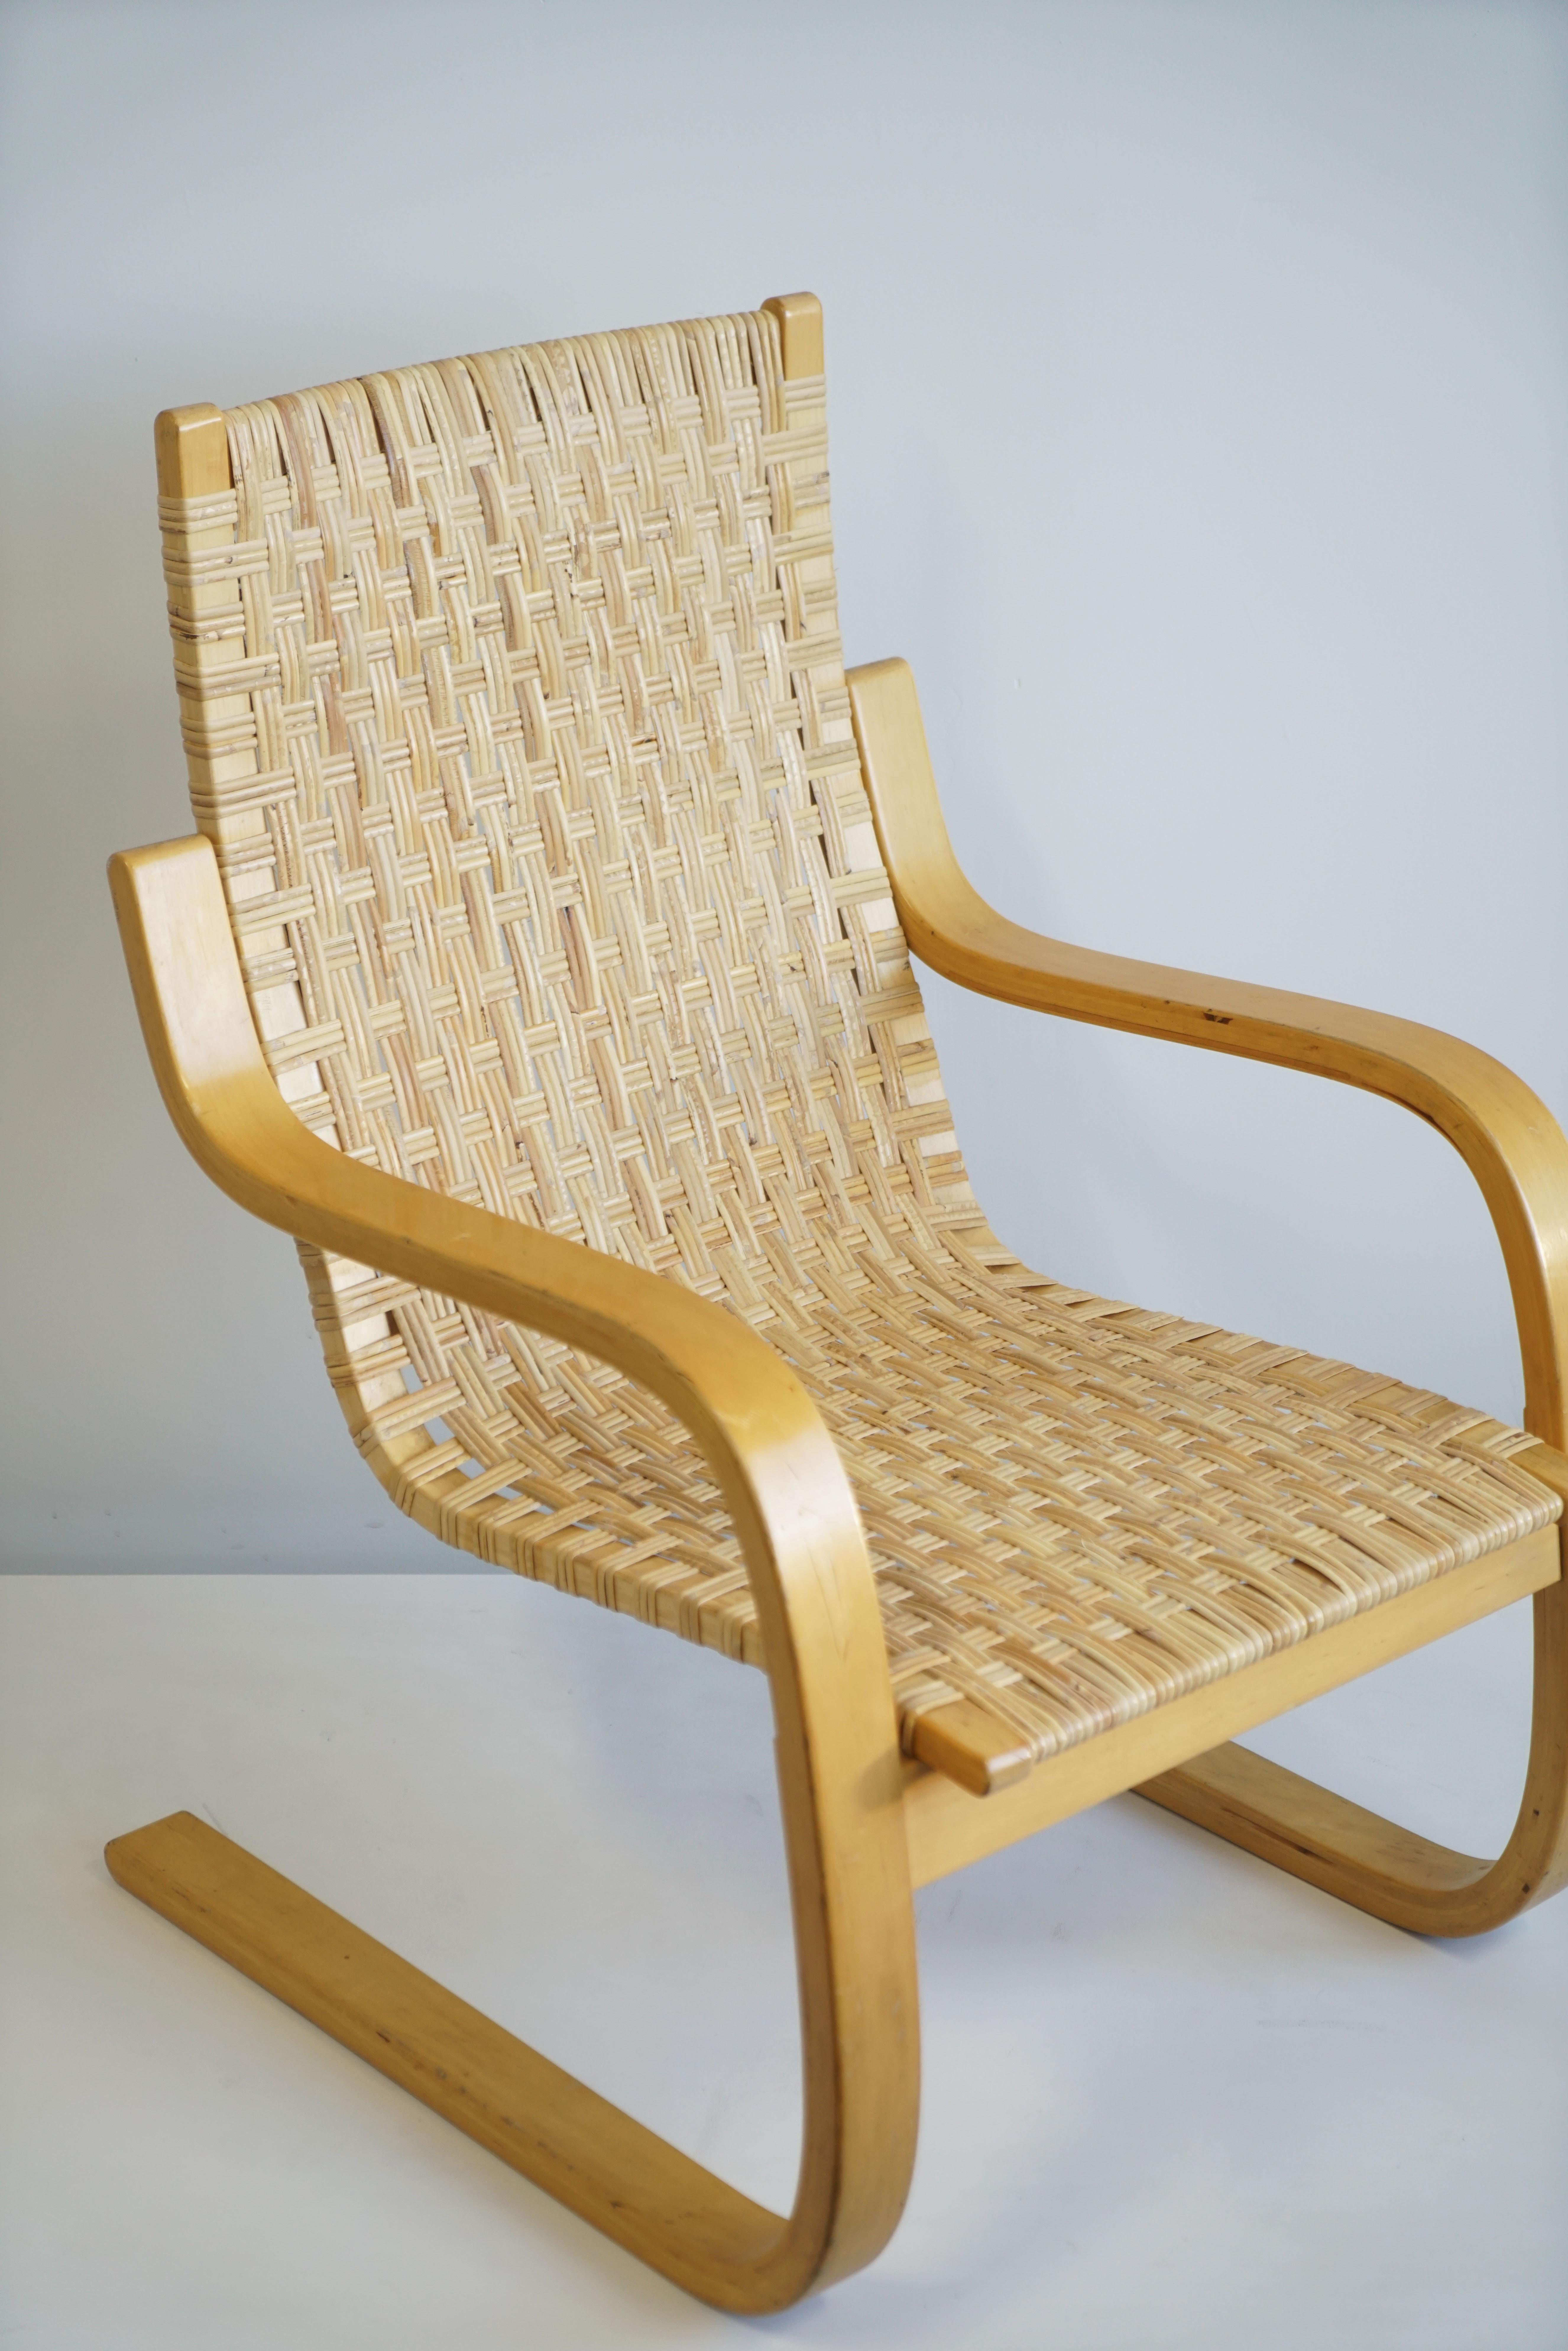 1960 Alvar Aalto Cantilever Chair Model 406 by Artek in Birch and Cane Webbing For Sale 2